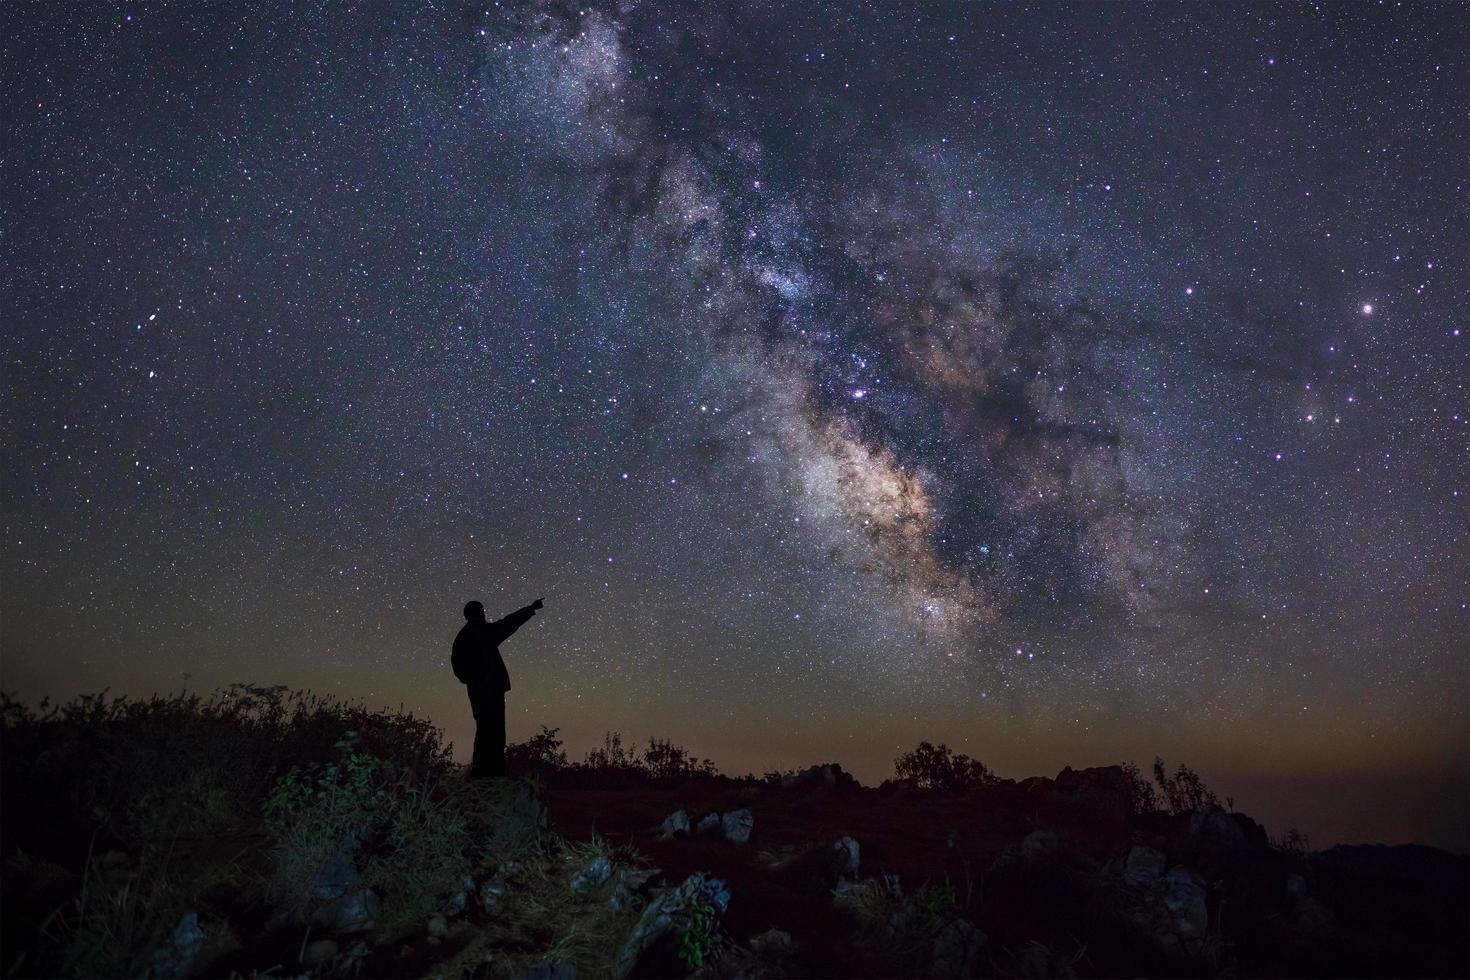 A Man is standing next to the milky way galaxy pointing on a bright star, Long exposure photograph, with grain photo